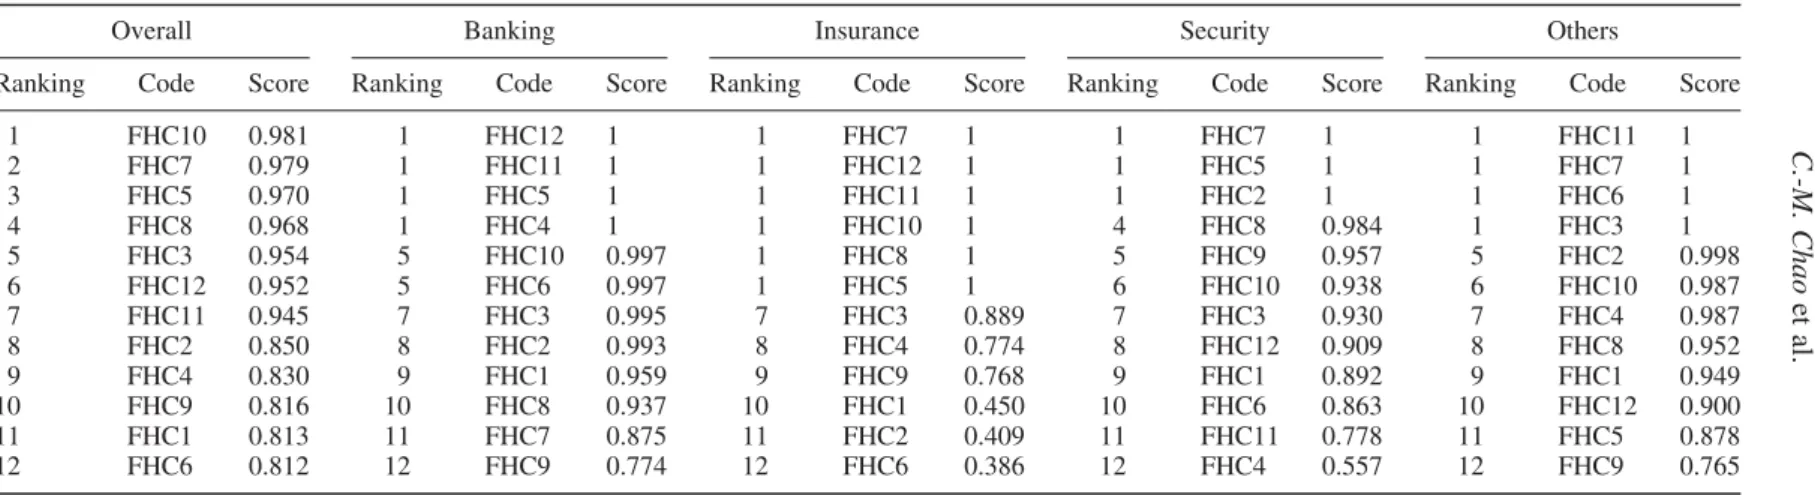 Table 7. Efficiency scores and ranking of FHC and its four subsidiaries.